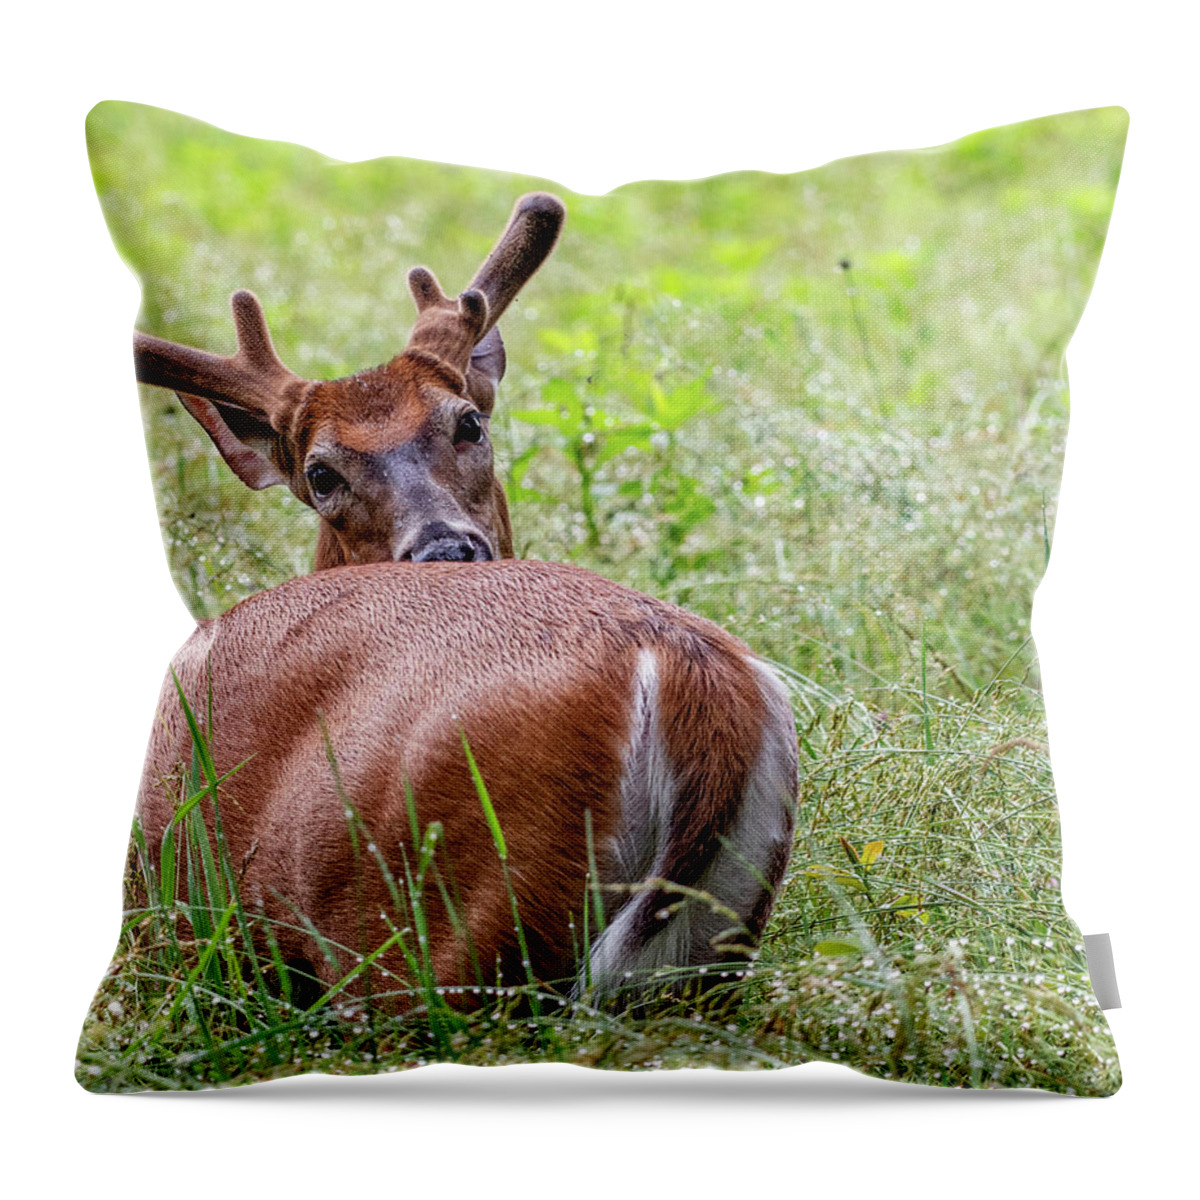 Does This Make My Butt Look Big? Throw Pillow by Marcy Wielfaert